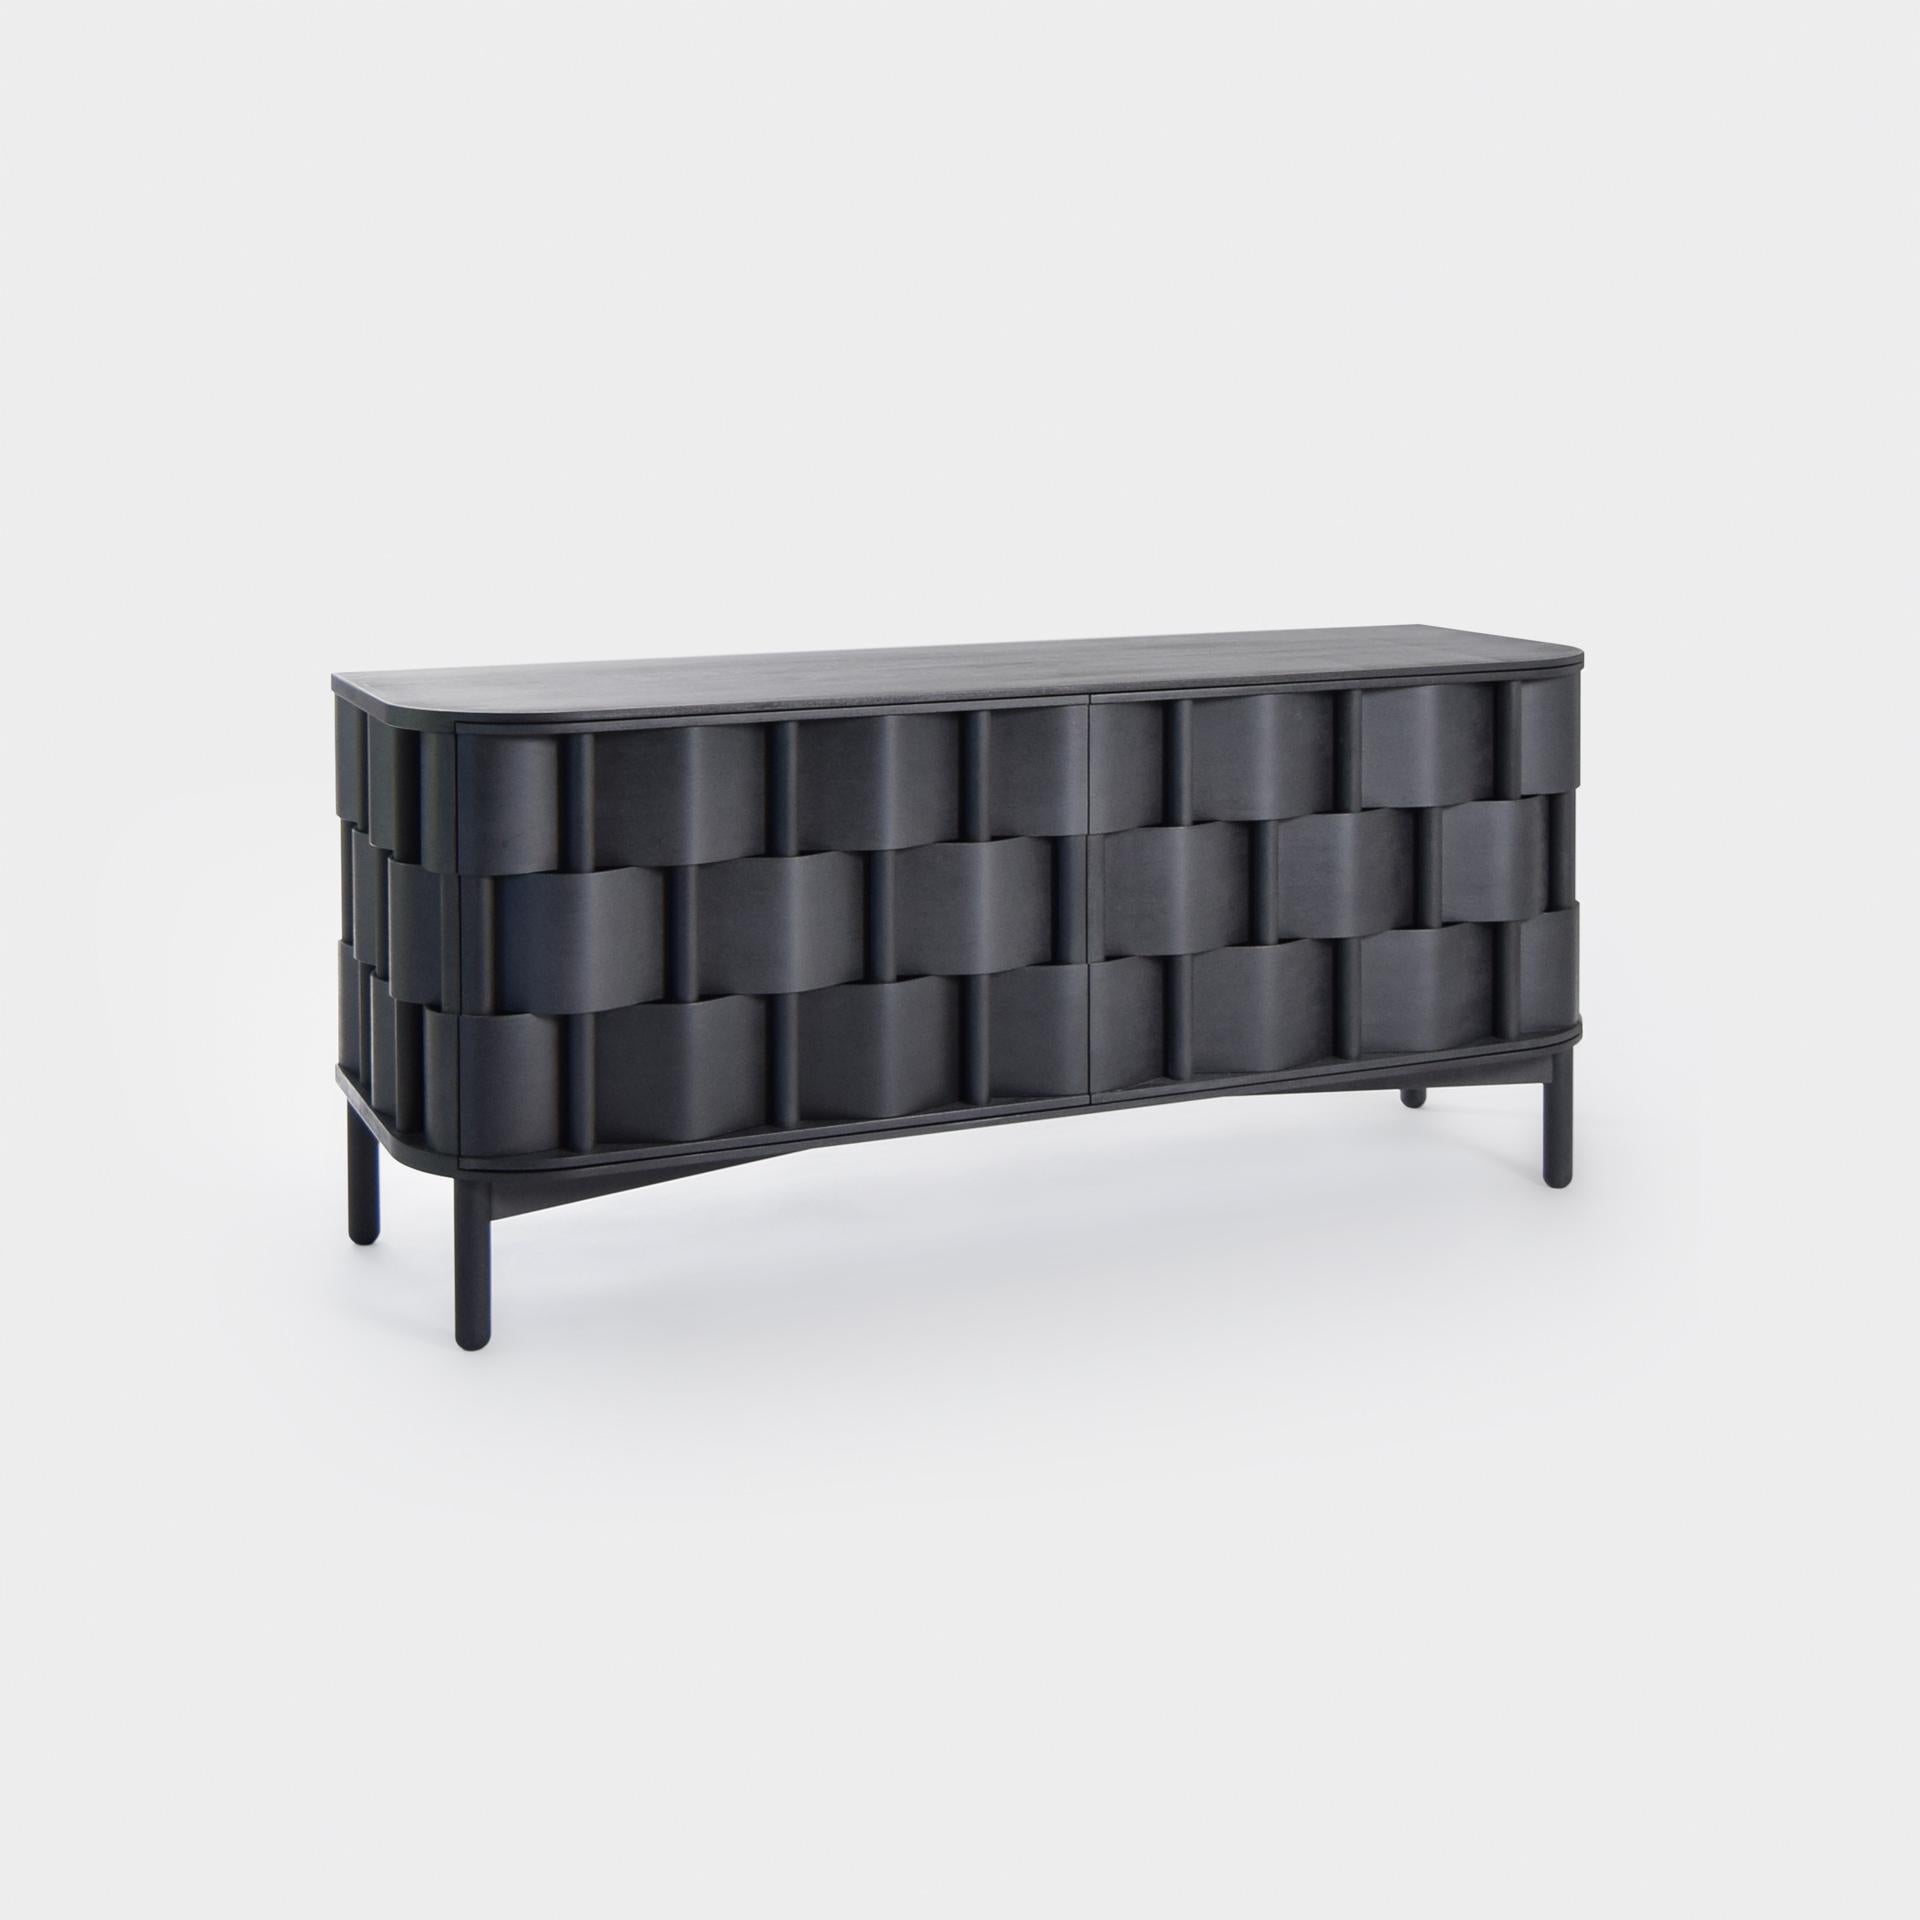 Weave W133-Black
Black sideboard, made of solid birchwood and laminated birchveneér. Modern yet Classic, bold yet modest the cabinet serves as a great example of Scandinavian contemporary design. Designed by Lukas Dahlén.

The minimal yet